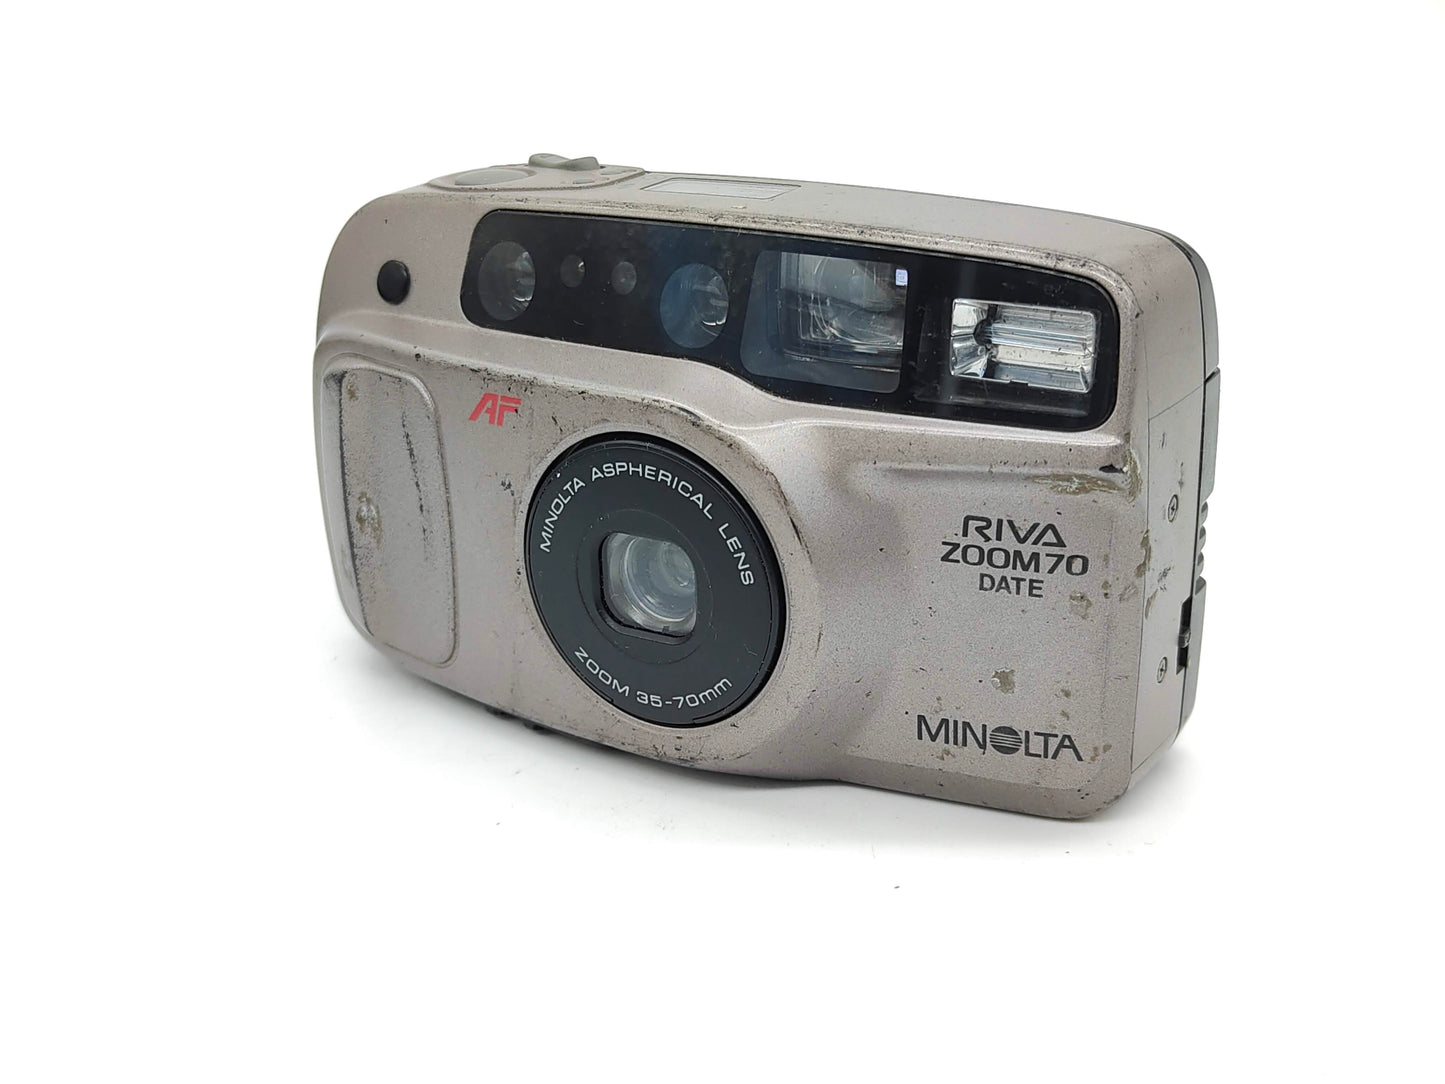 Minolta Riva Zoom 70 date point-and-shoot film camera - fair condition